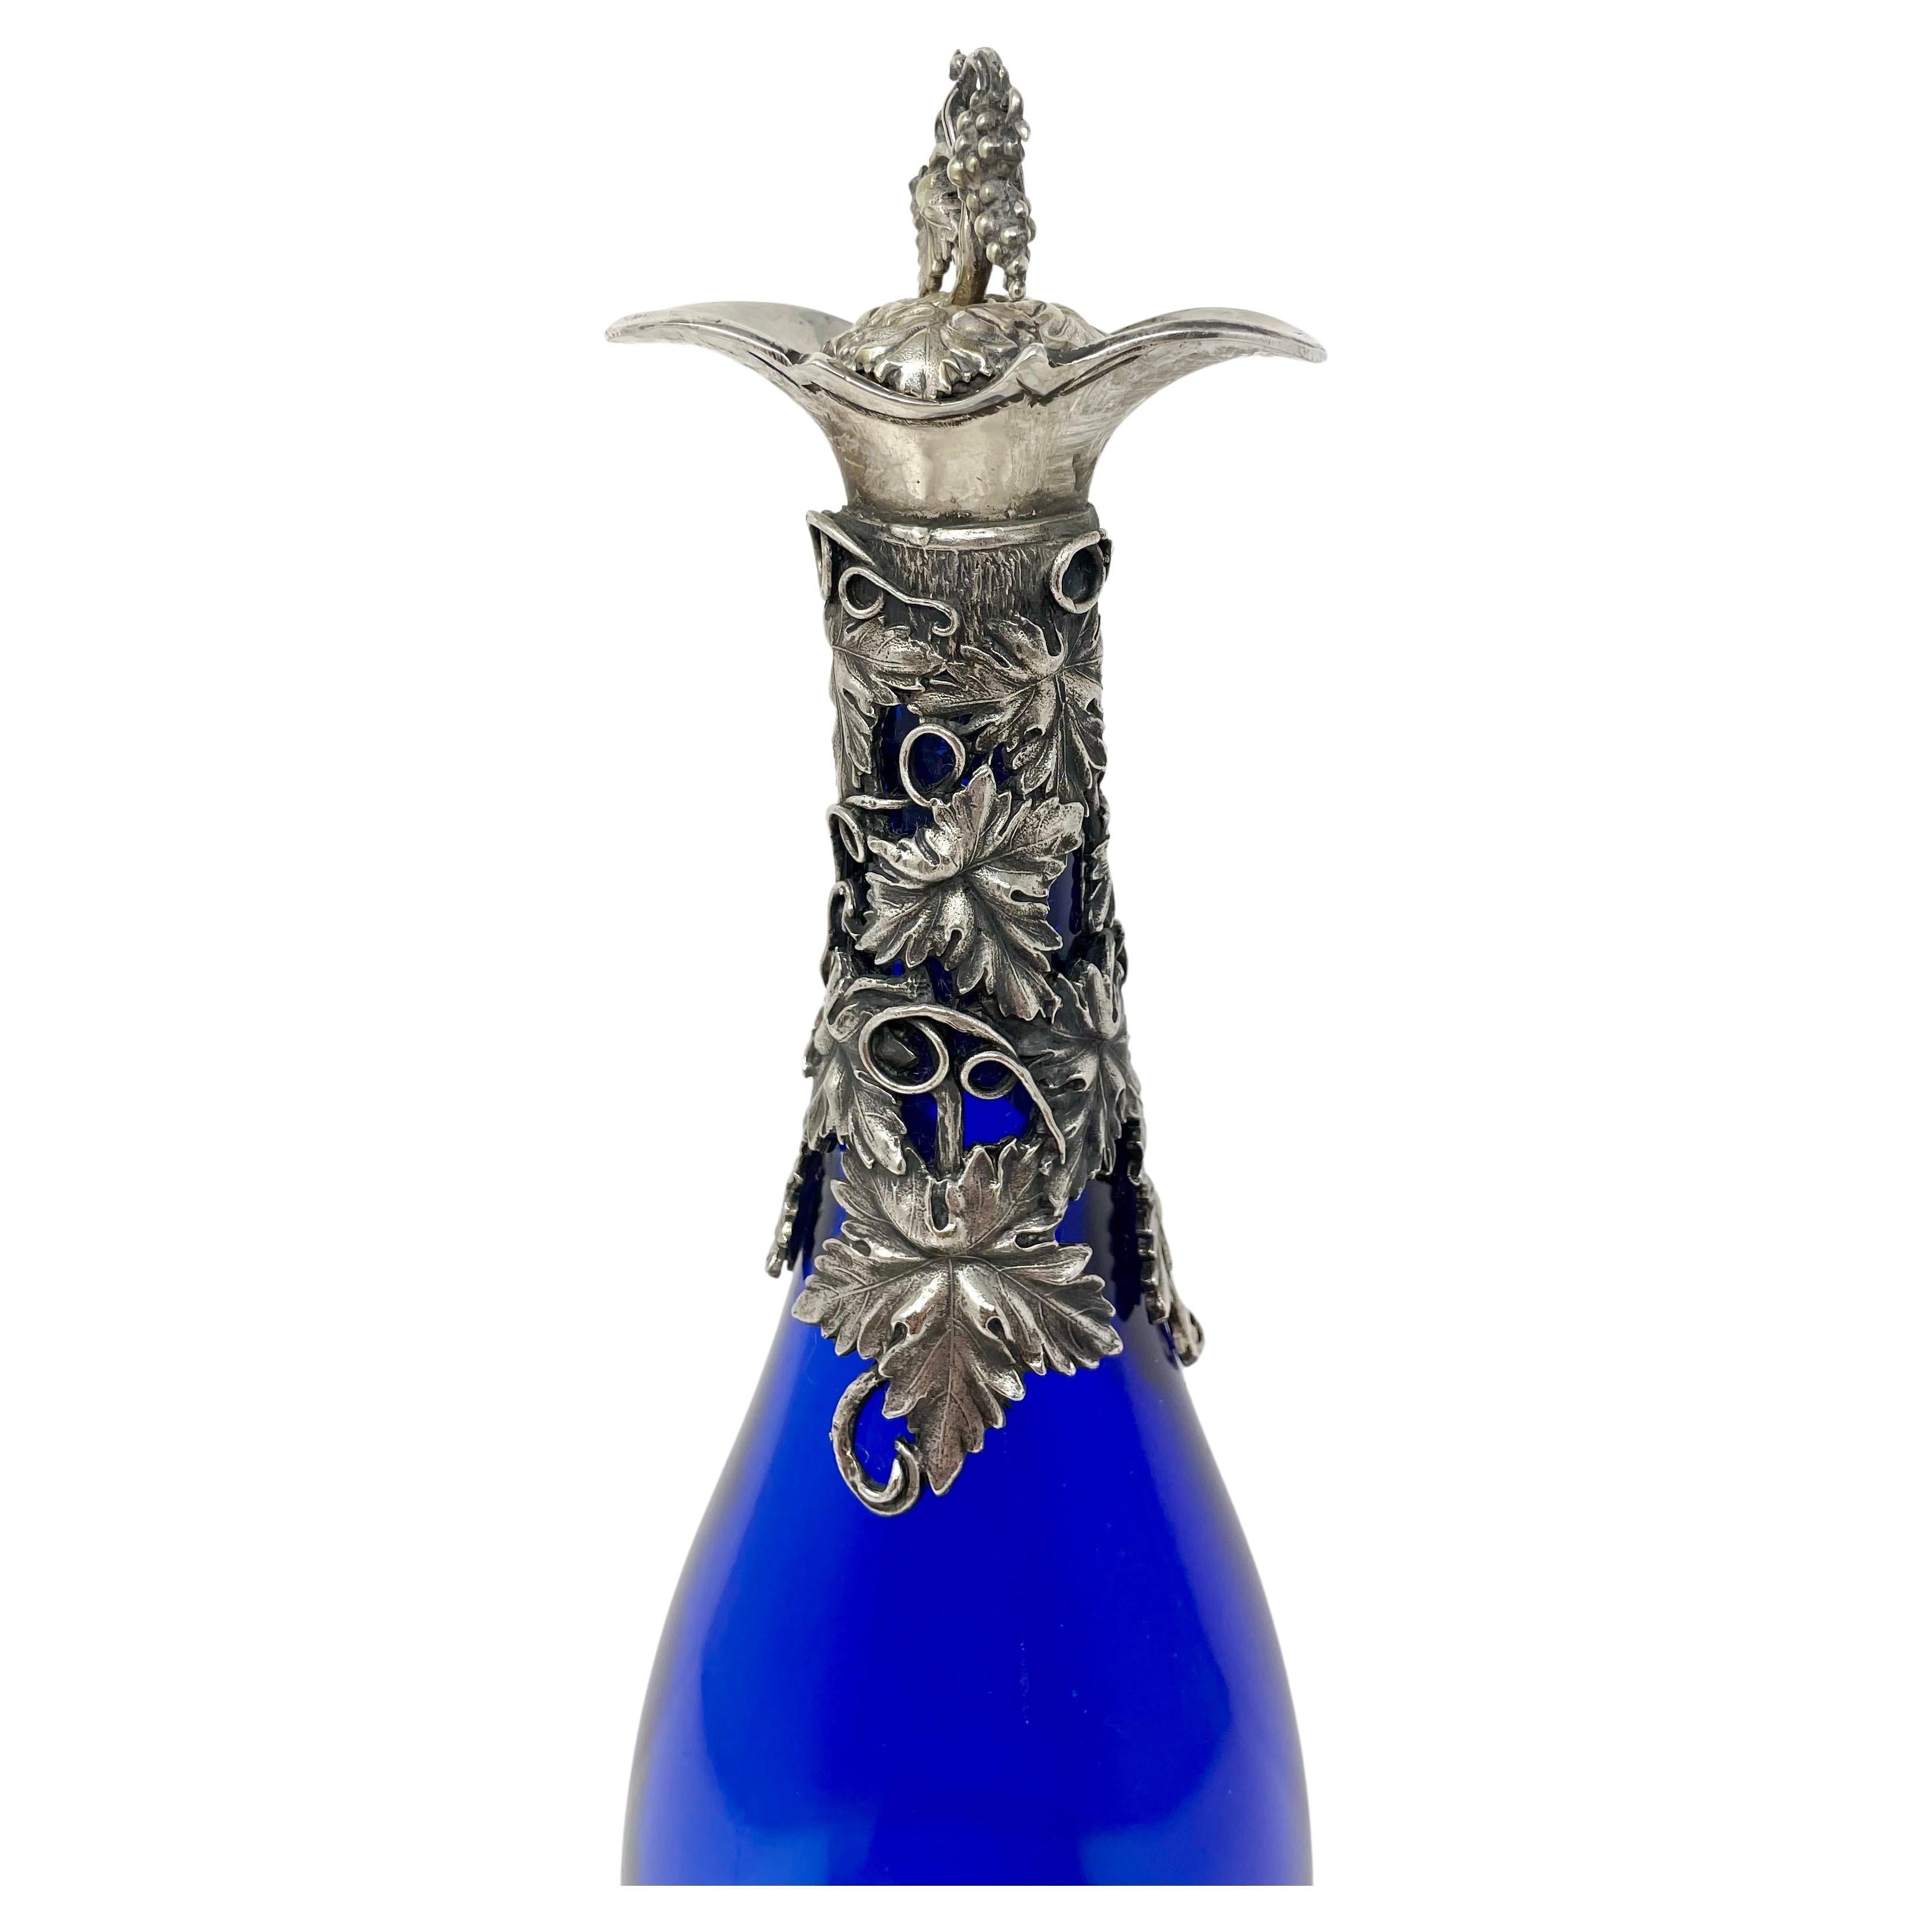 19th Century Antique Cobalt Blue Glass Liquor Bottle with Sterling Silver Top Circa 1890-1900 For Sale